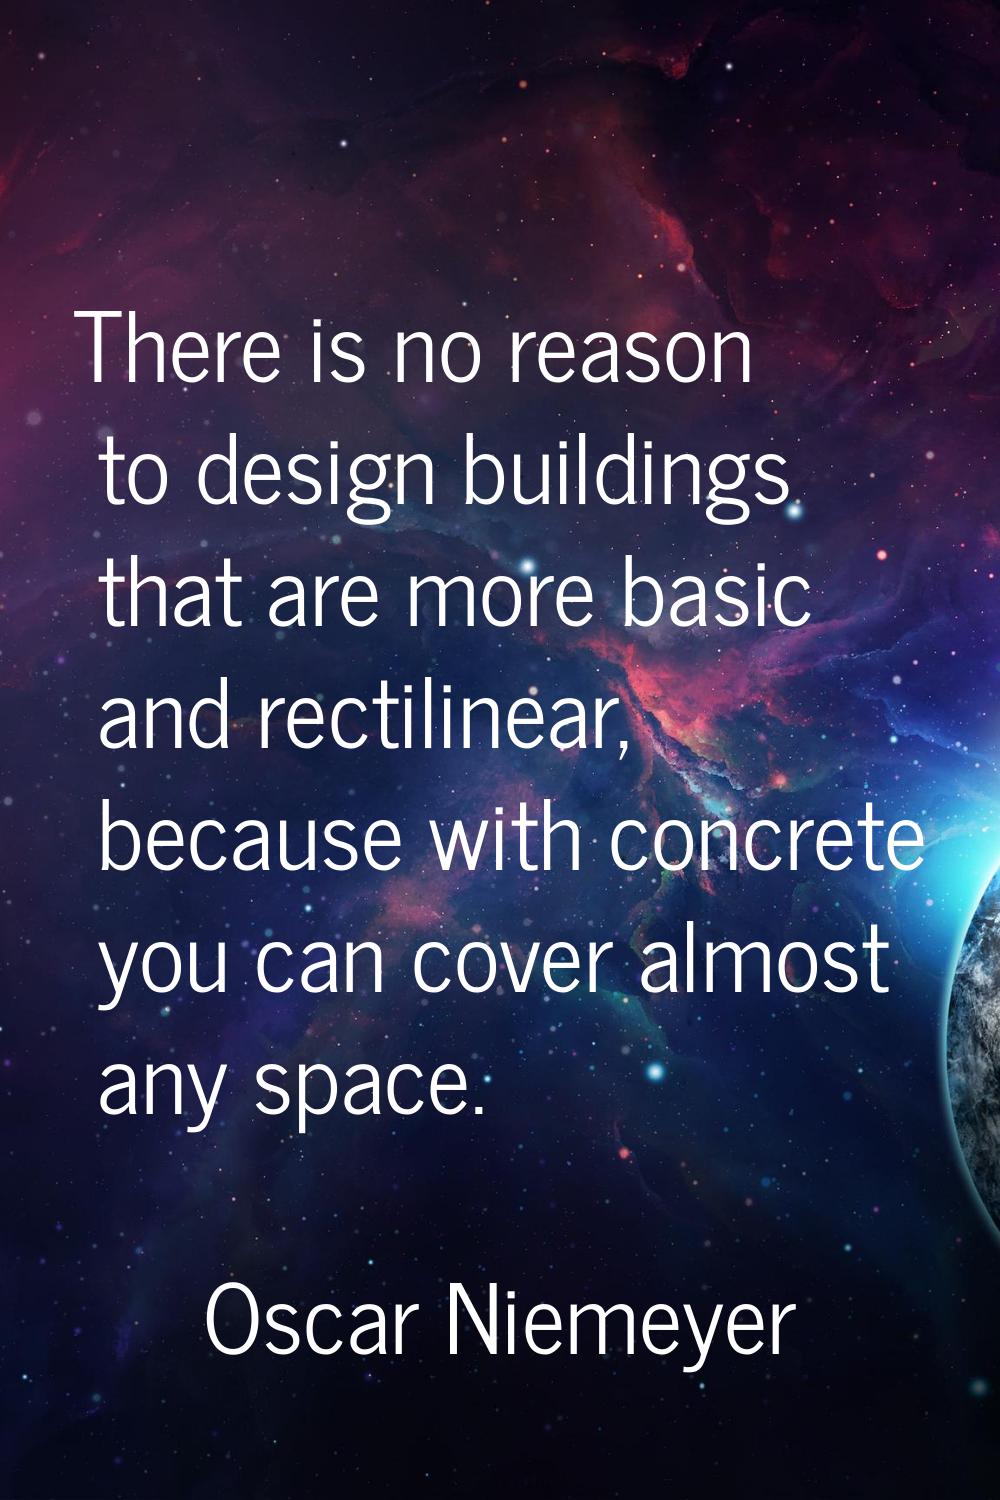 There is no reason to design buildings that are more basic and rectilinear, because with concrete y